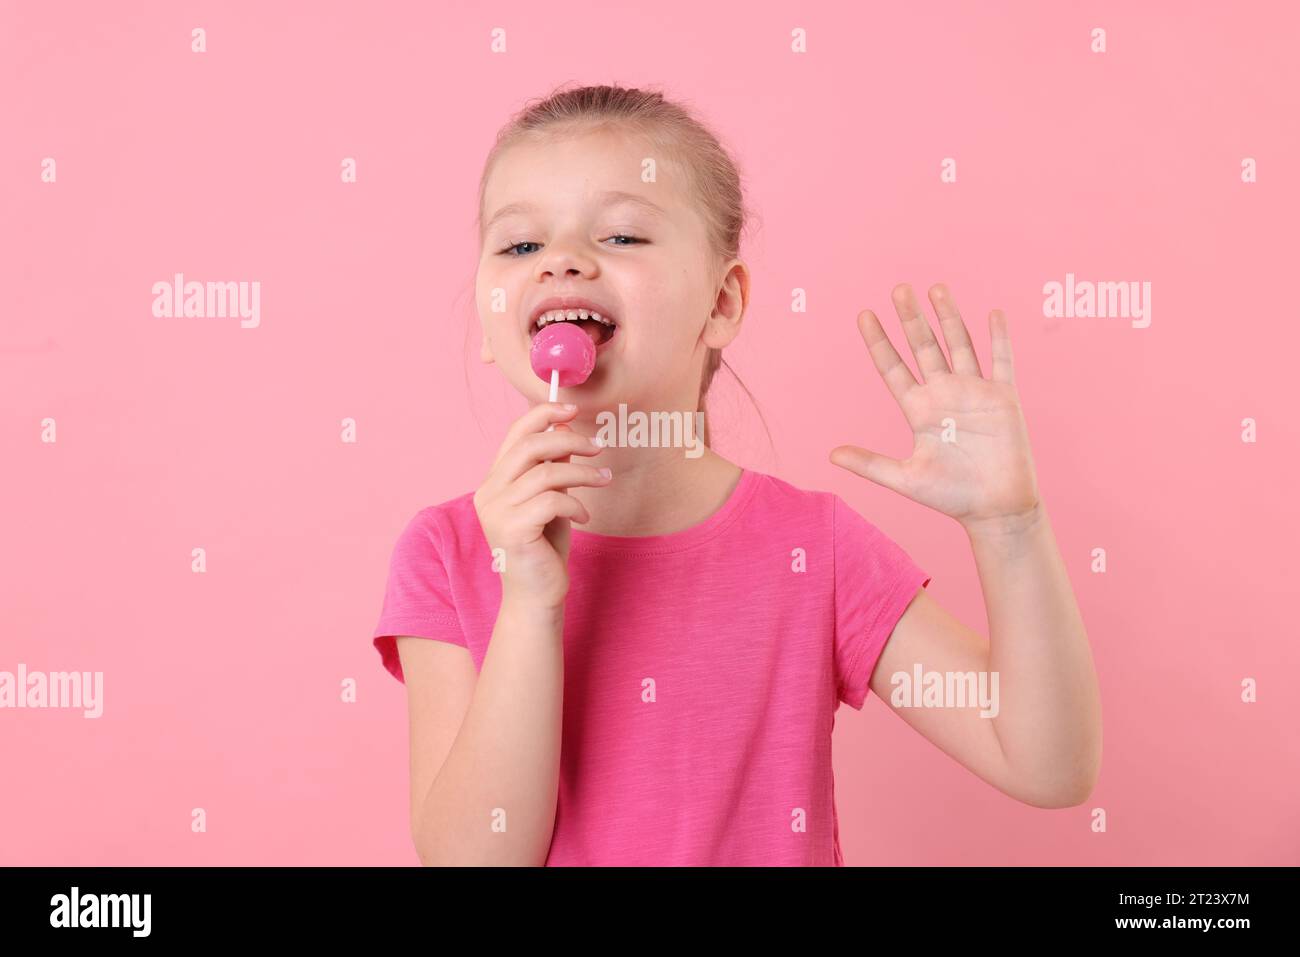 Cute little girl licking lollipop on pink background Stock Photo